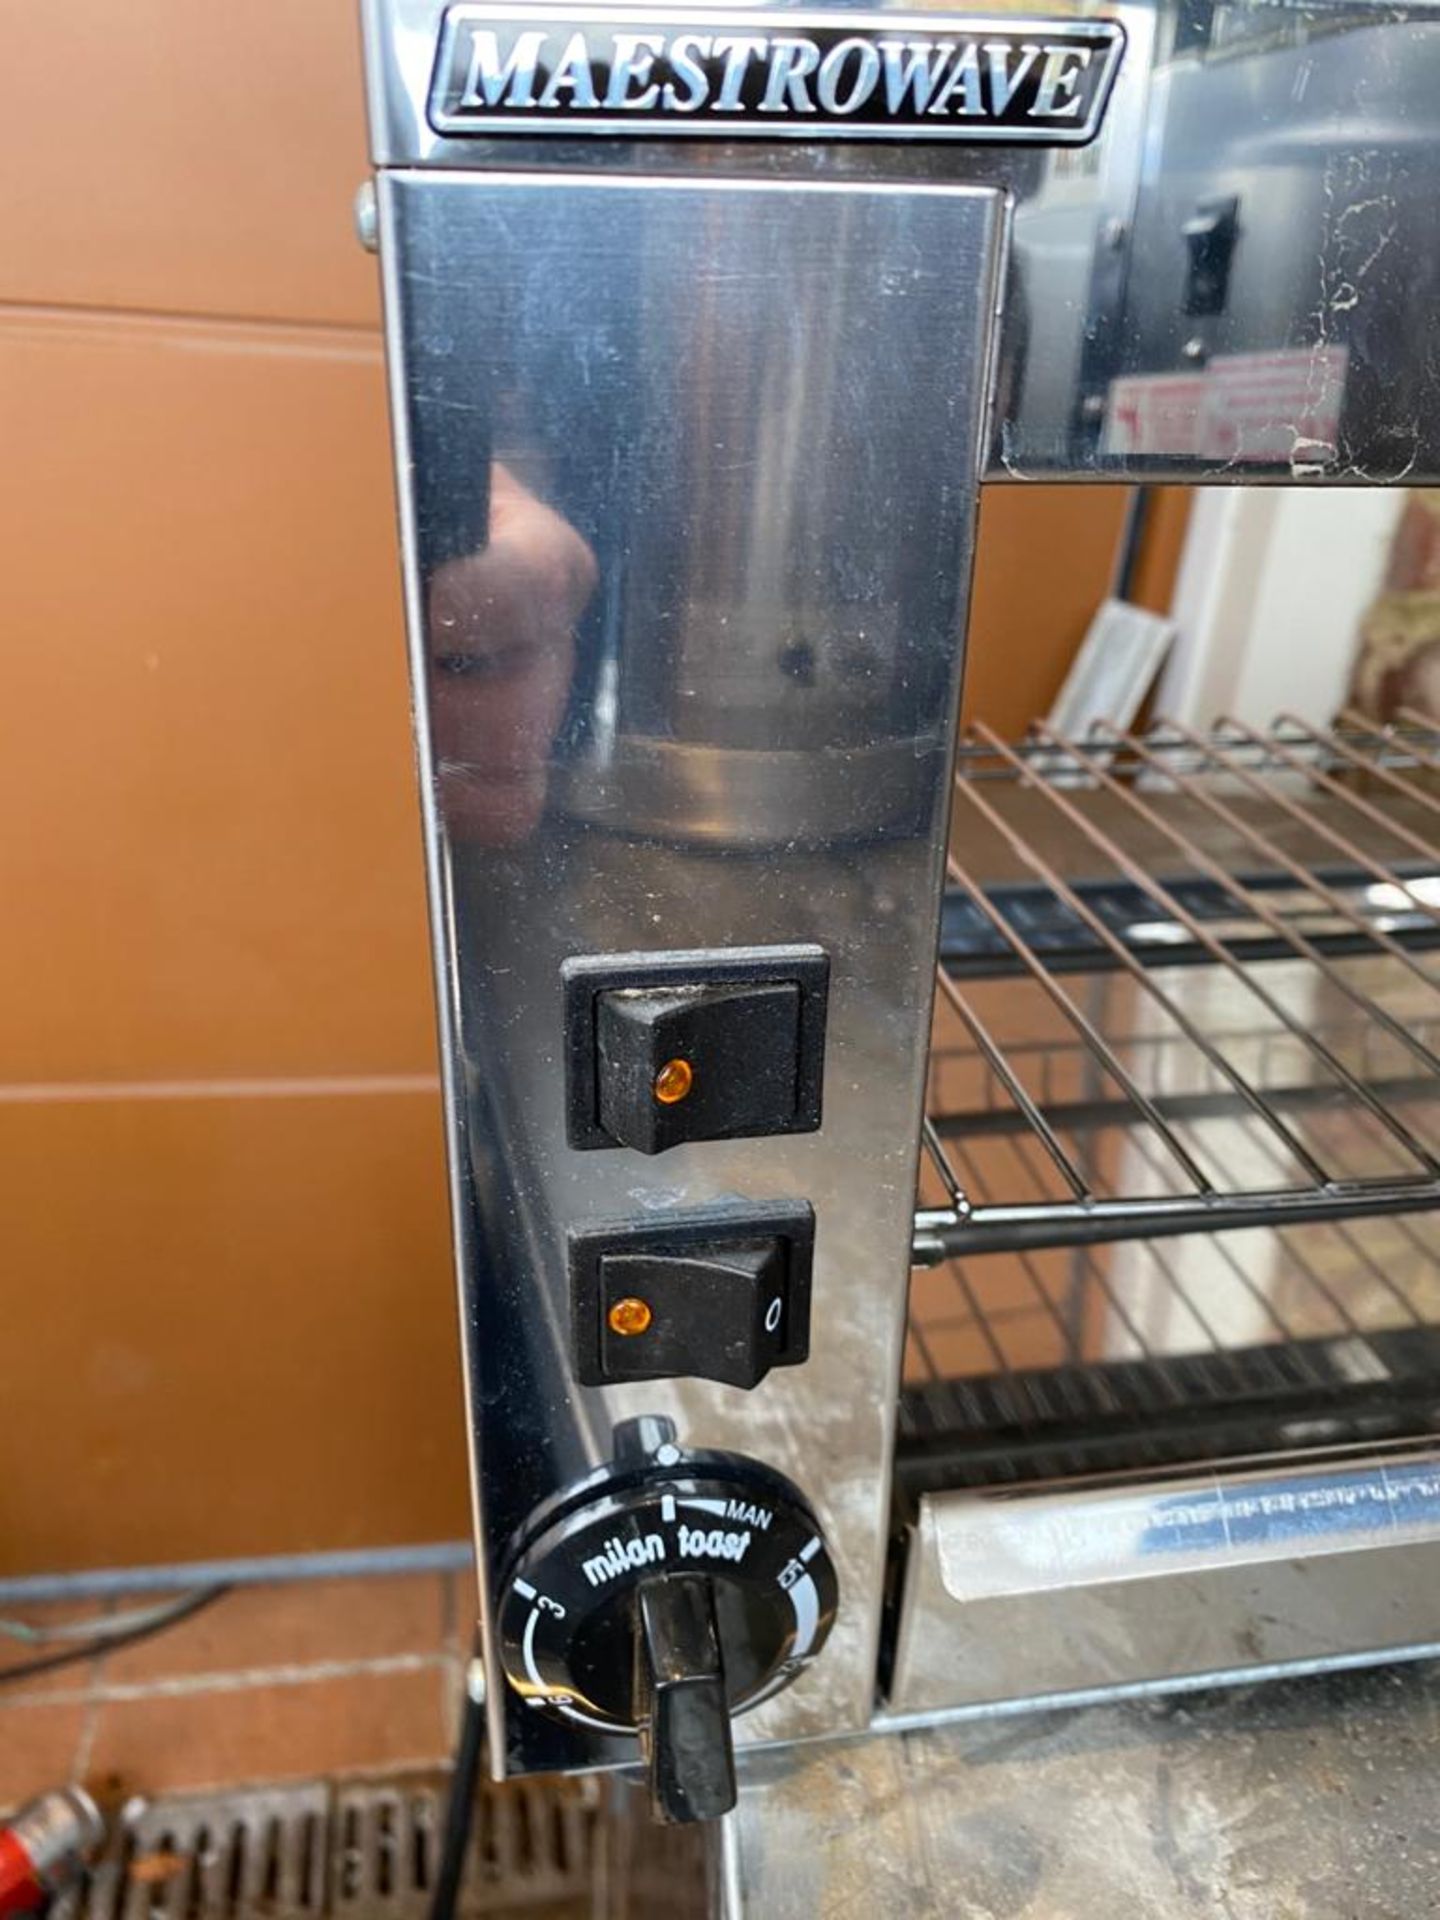 1 x Maestrowave Milan Toaster With Stainless Steel Finish - CL667 - Location: Brighton, Sussex, - Image 2 of 3